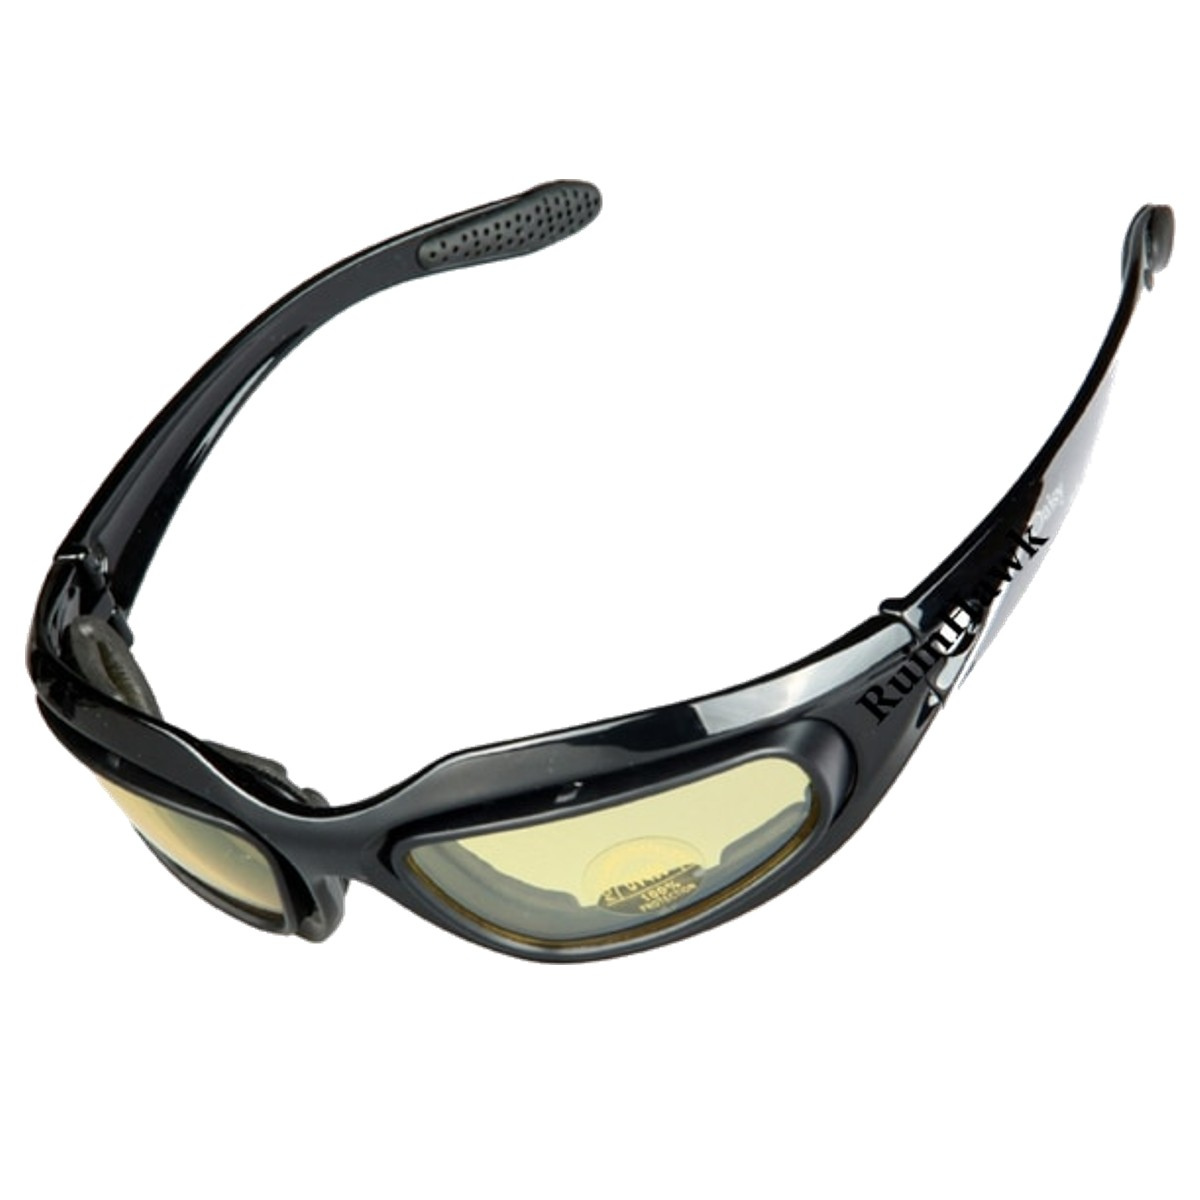 A pair of Classic Daisy Biker Motorcycle Sunglasses with yellow lenses providing protection for bikers.